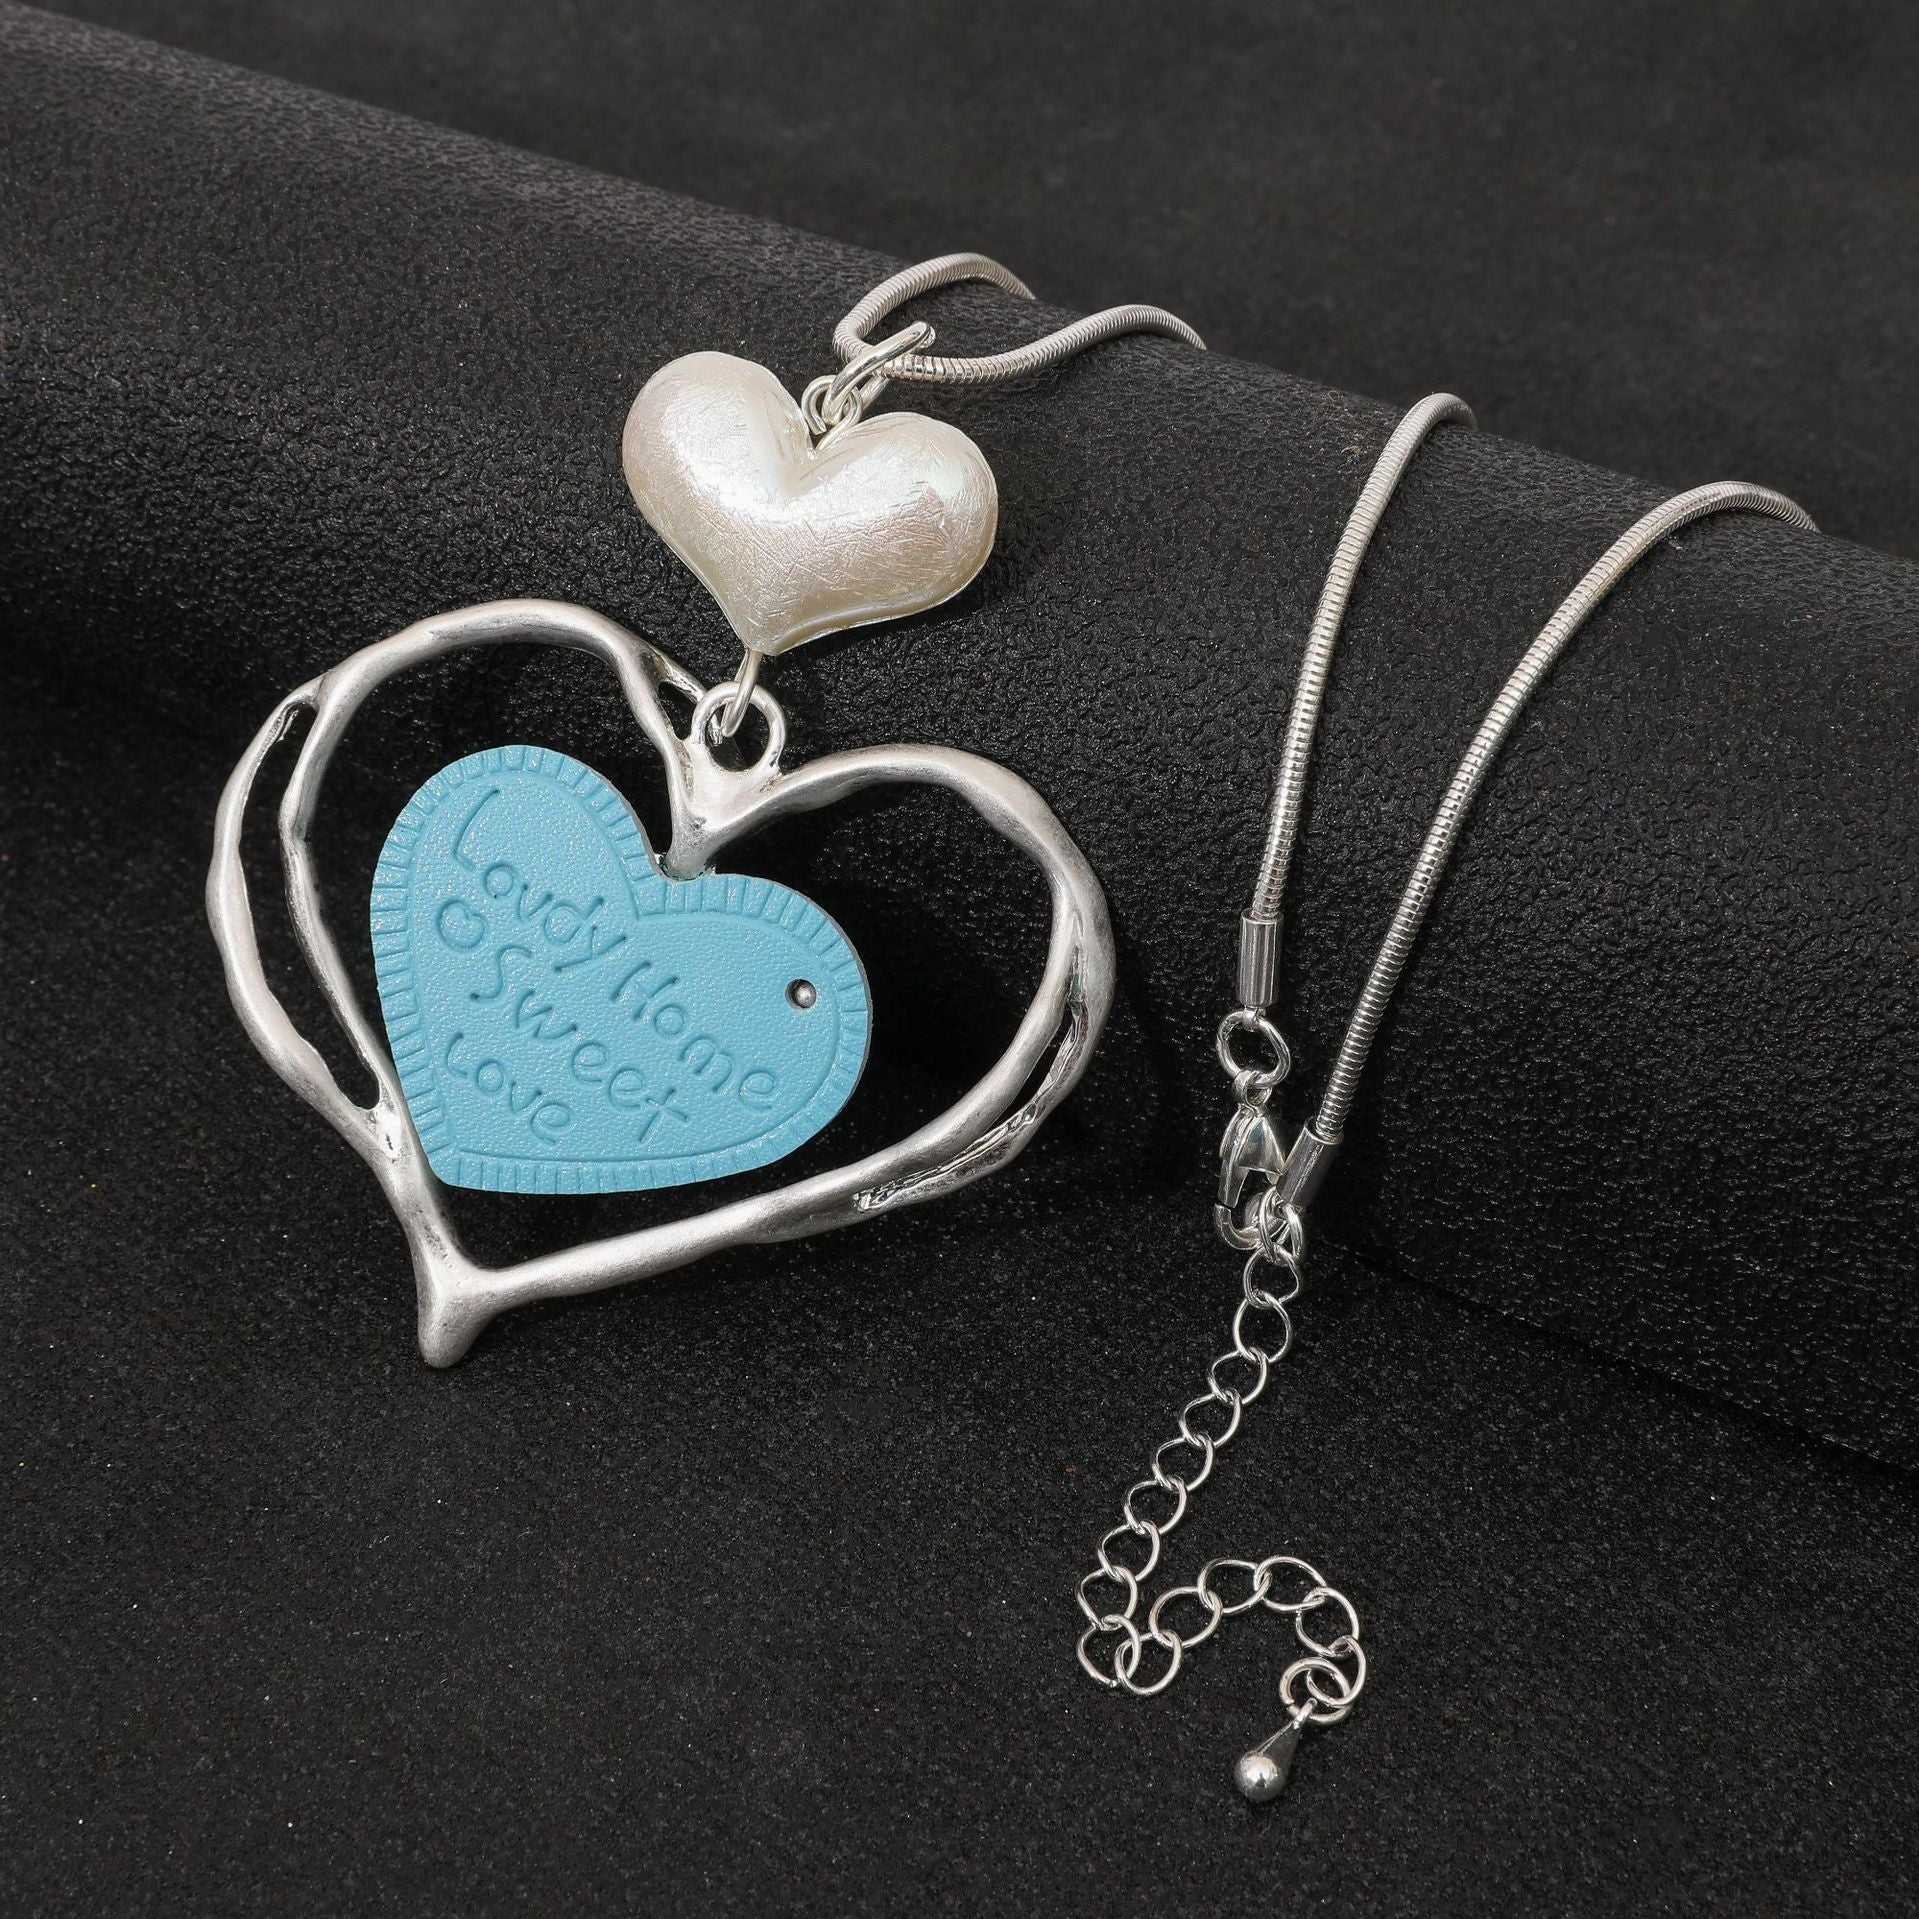 Heart Pendant Chain Alloy Necklace N5051